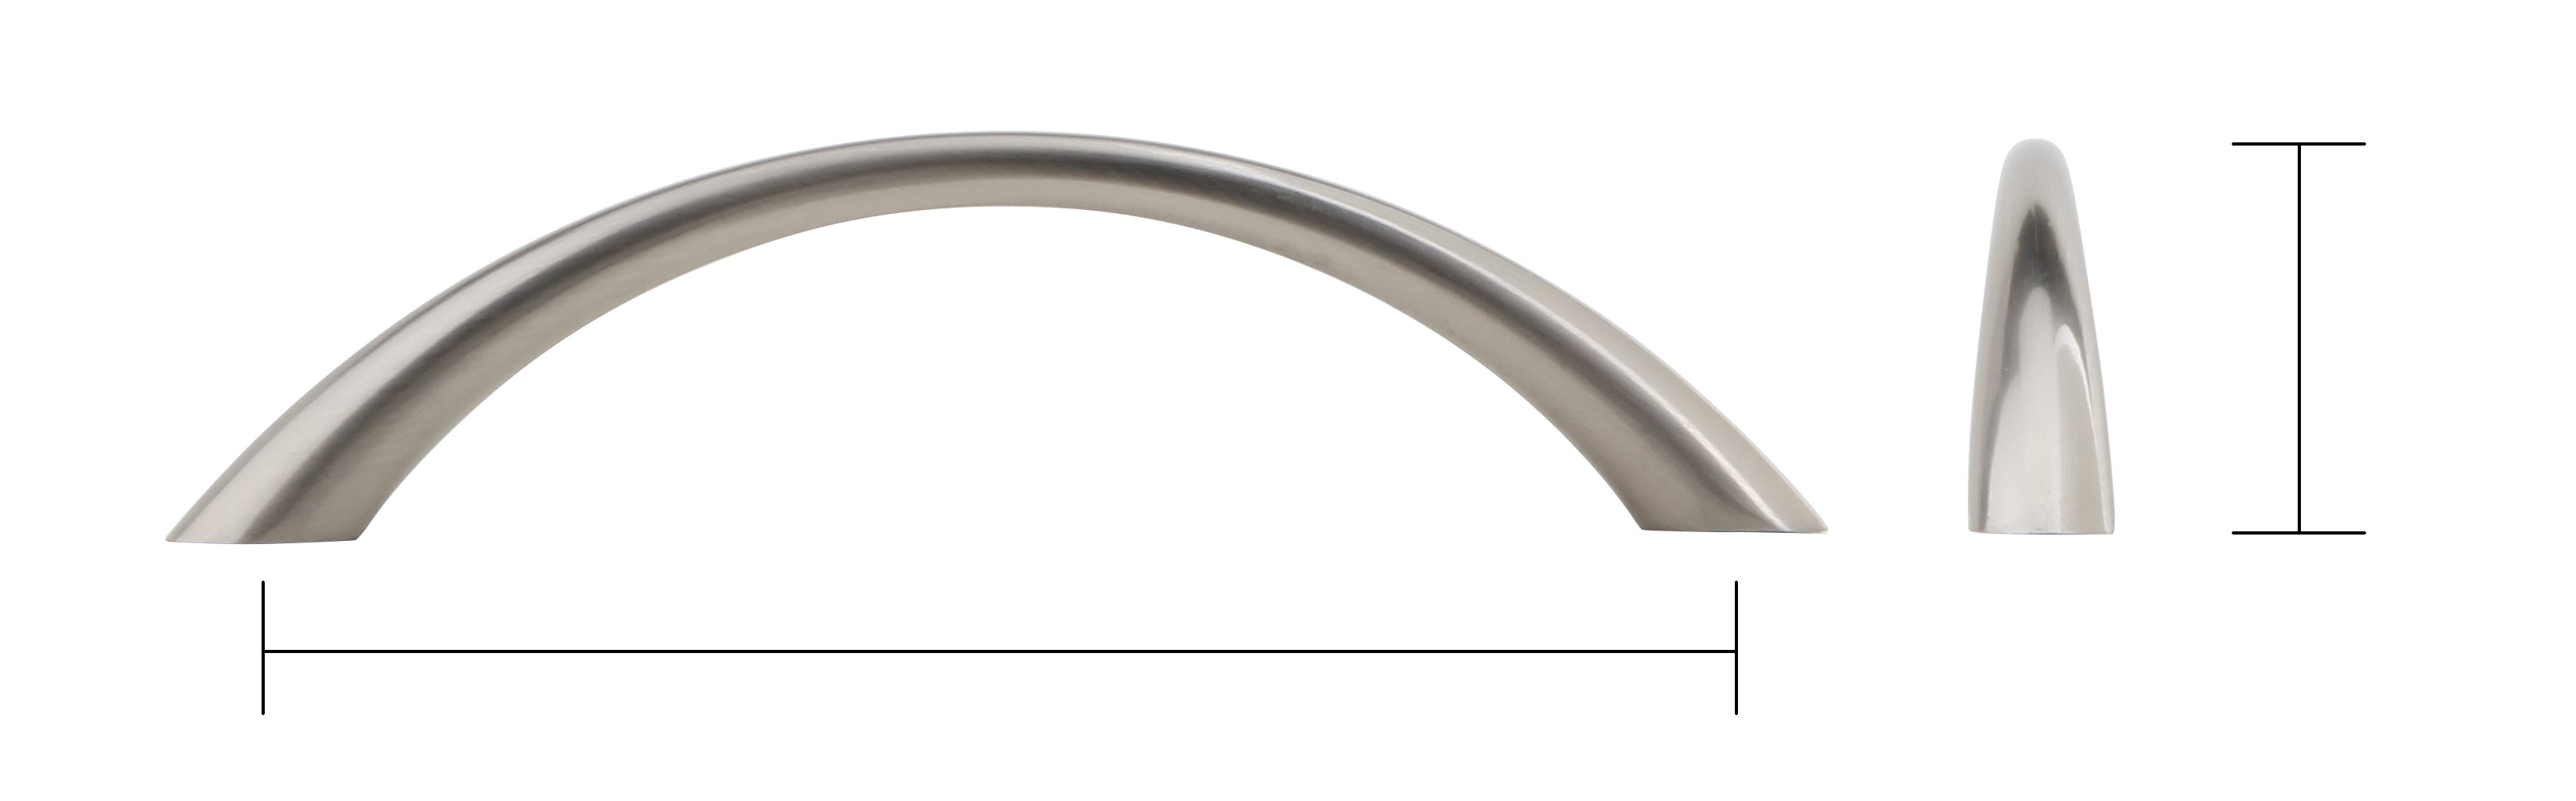 Silverline P2021 P2022 Contemporary Streamline Curved Arch Cabinet Pull Various Sizes and Finishes